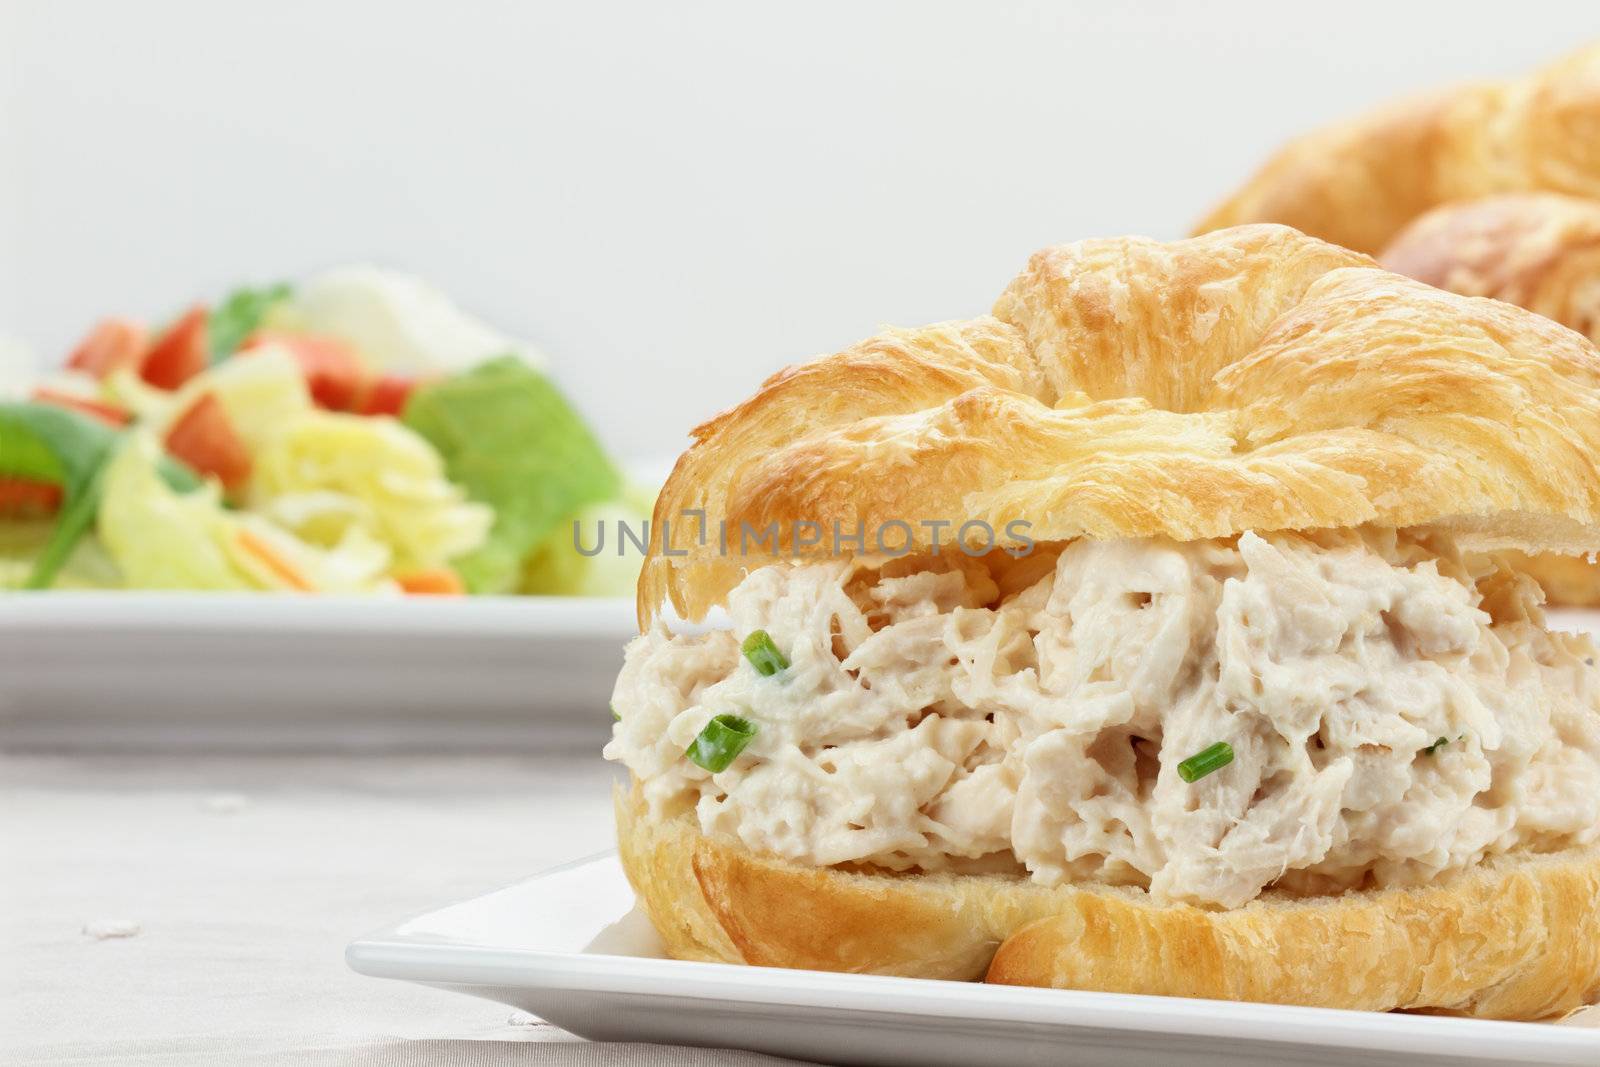 Chicken salad on a croissant bun with a healthy salad.

